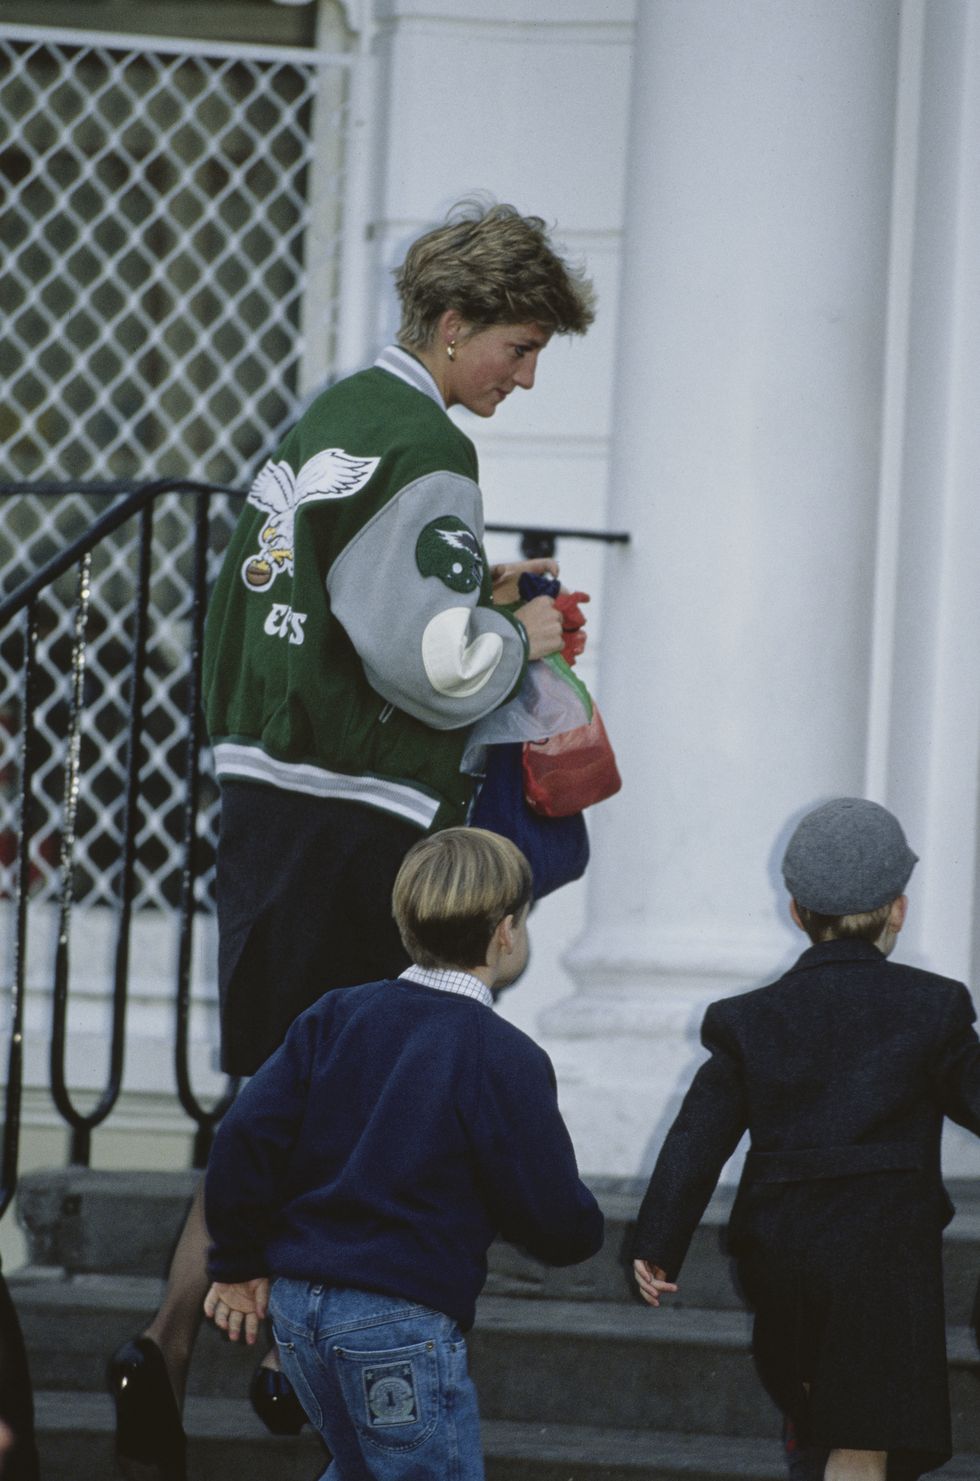 Princess Diana wore Eagles gear in the '90s thanks to Grace Kelly